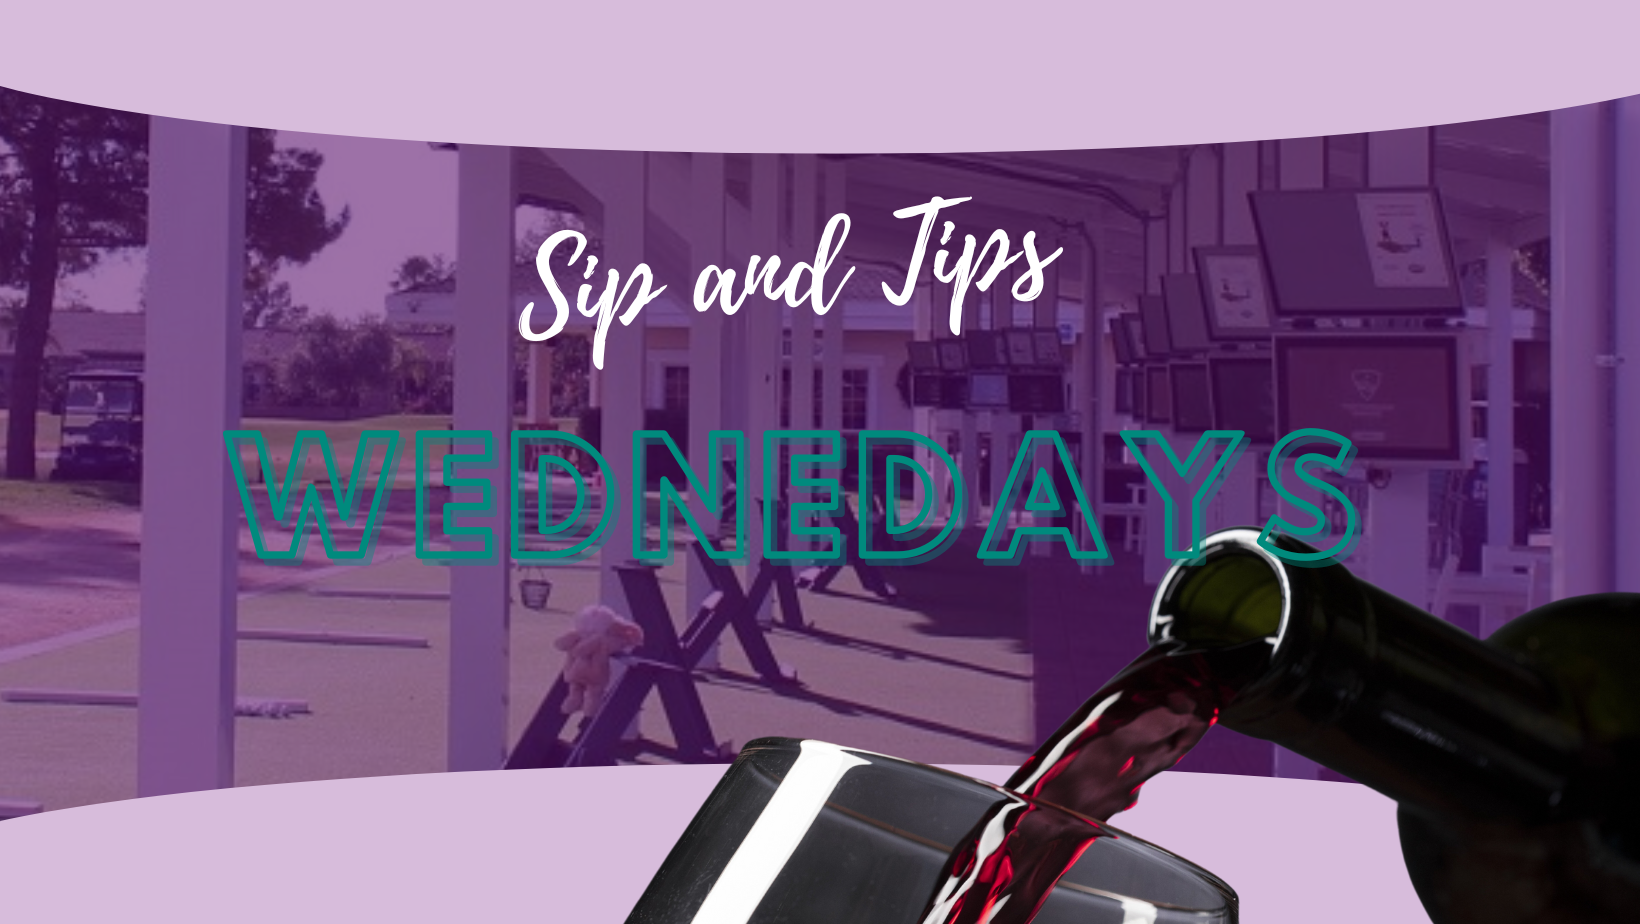 Augusta Ranch Sip Tips wednesdays event cover